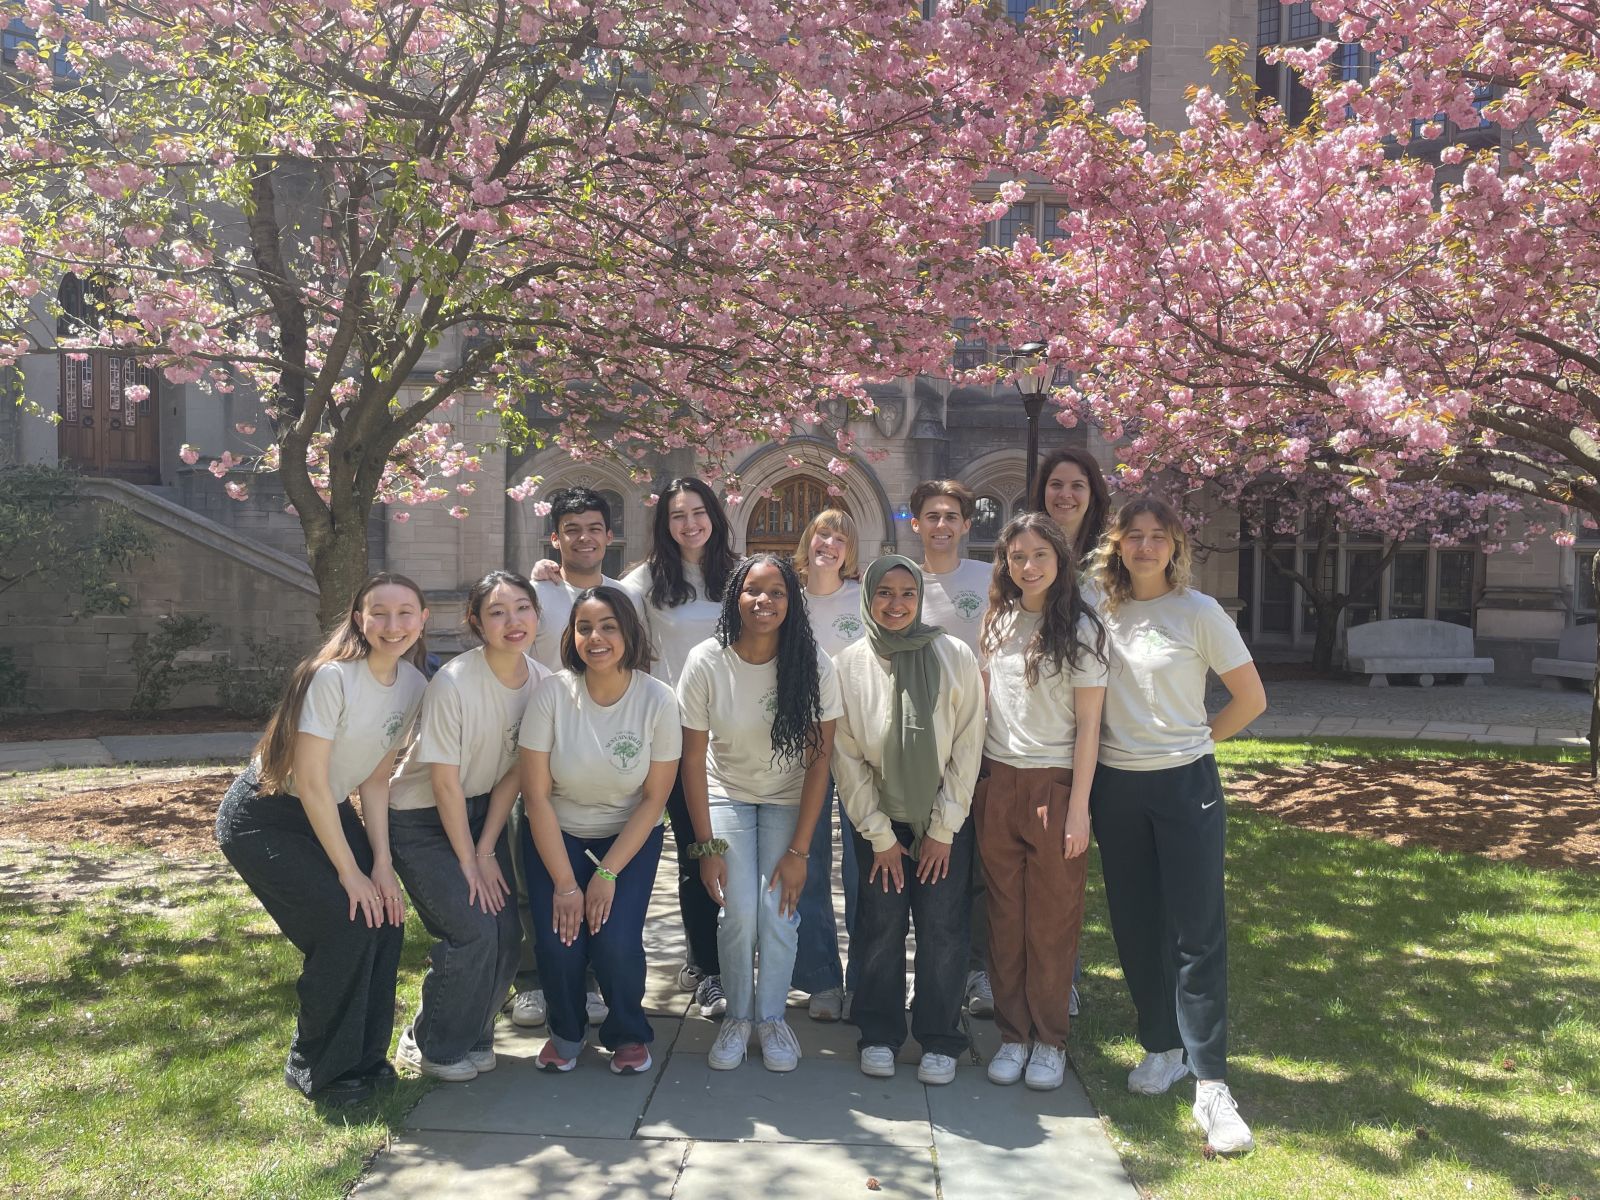 Students members of the Sustainability Peer Educator Program photographed under a flowering tree